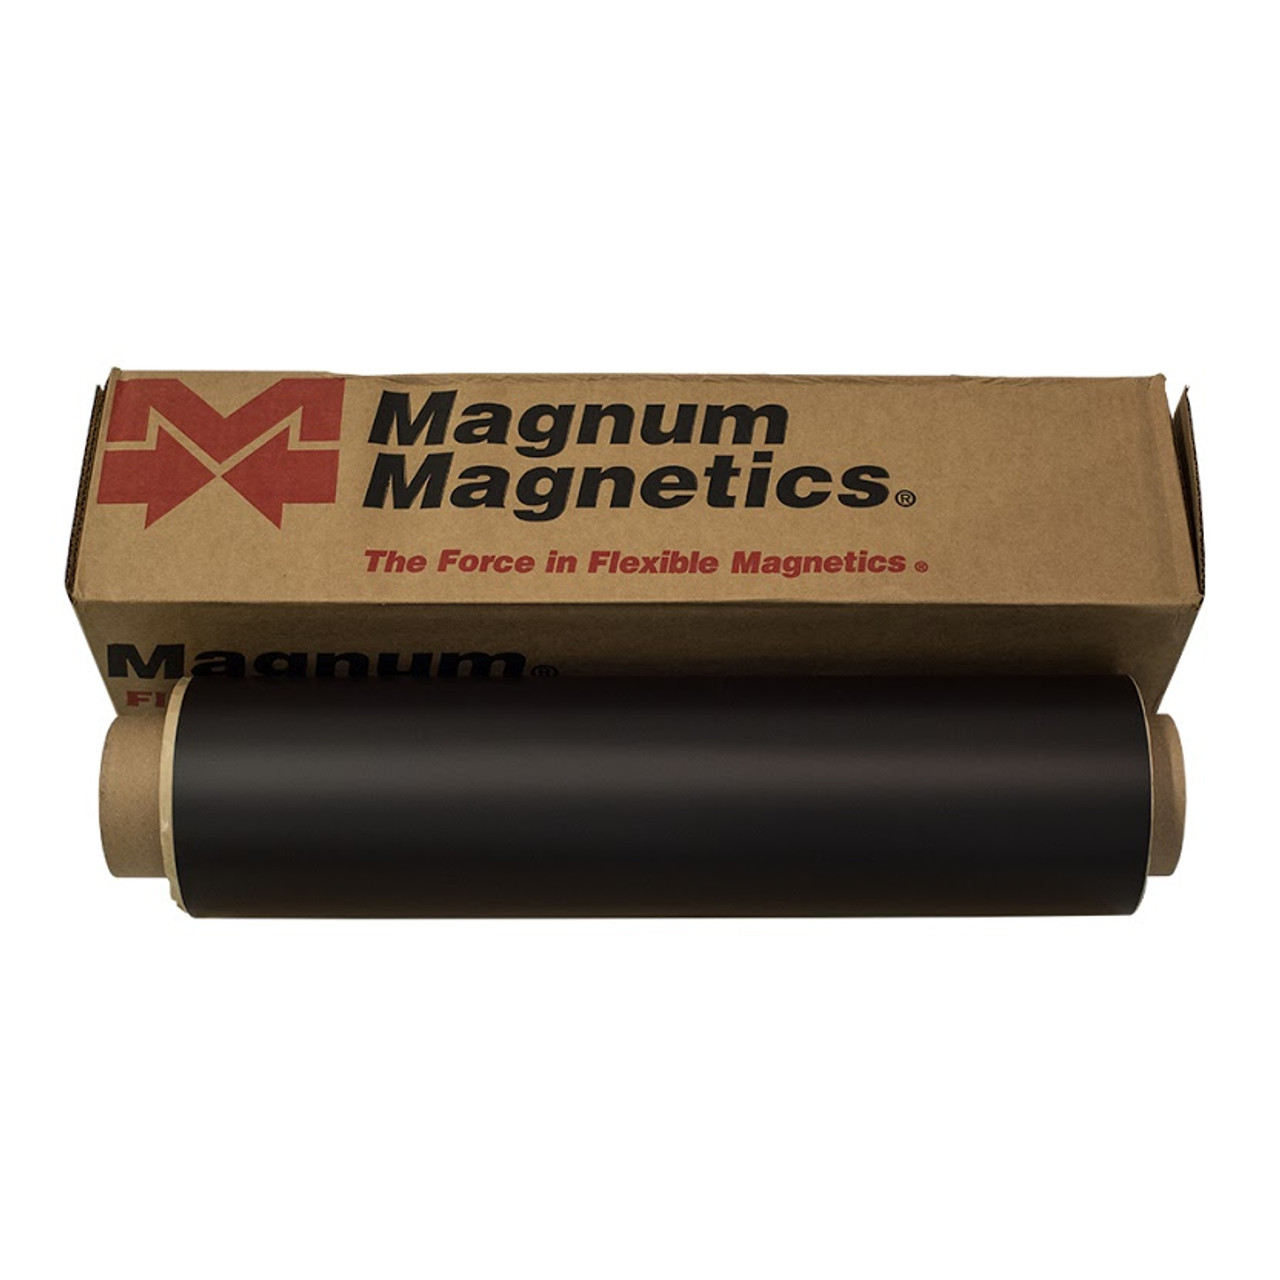 Magnum Magnetics MuscleMag for Latex Printers - 48 x 50' Roll